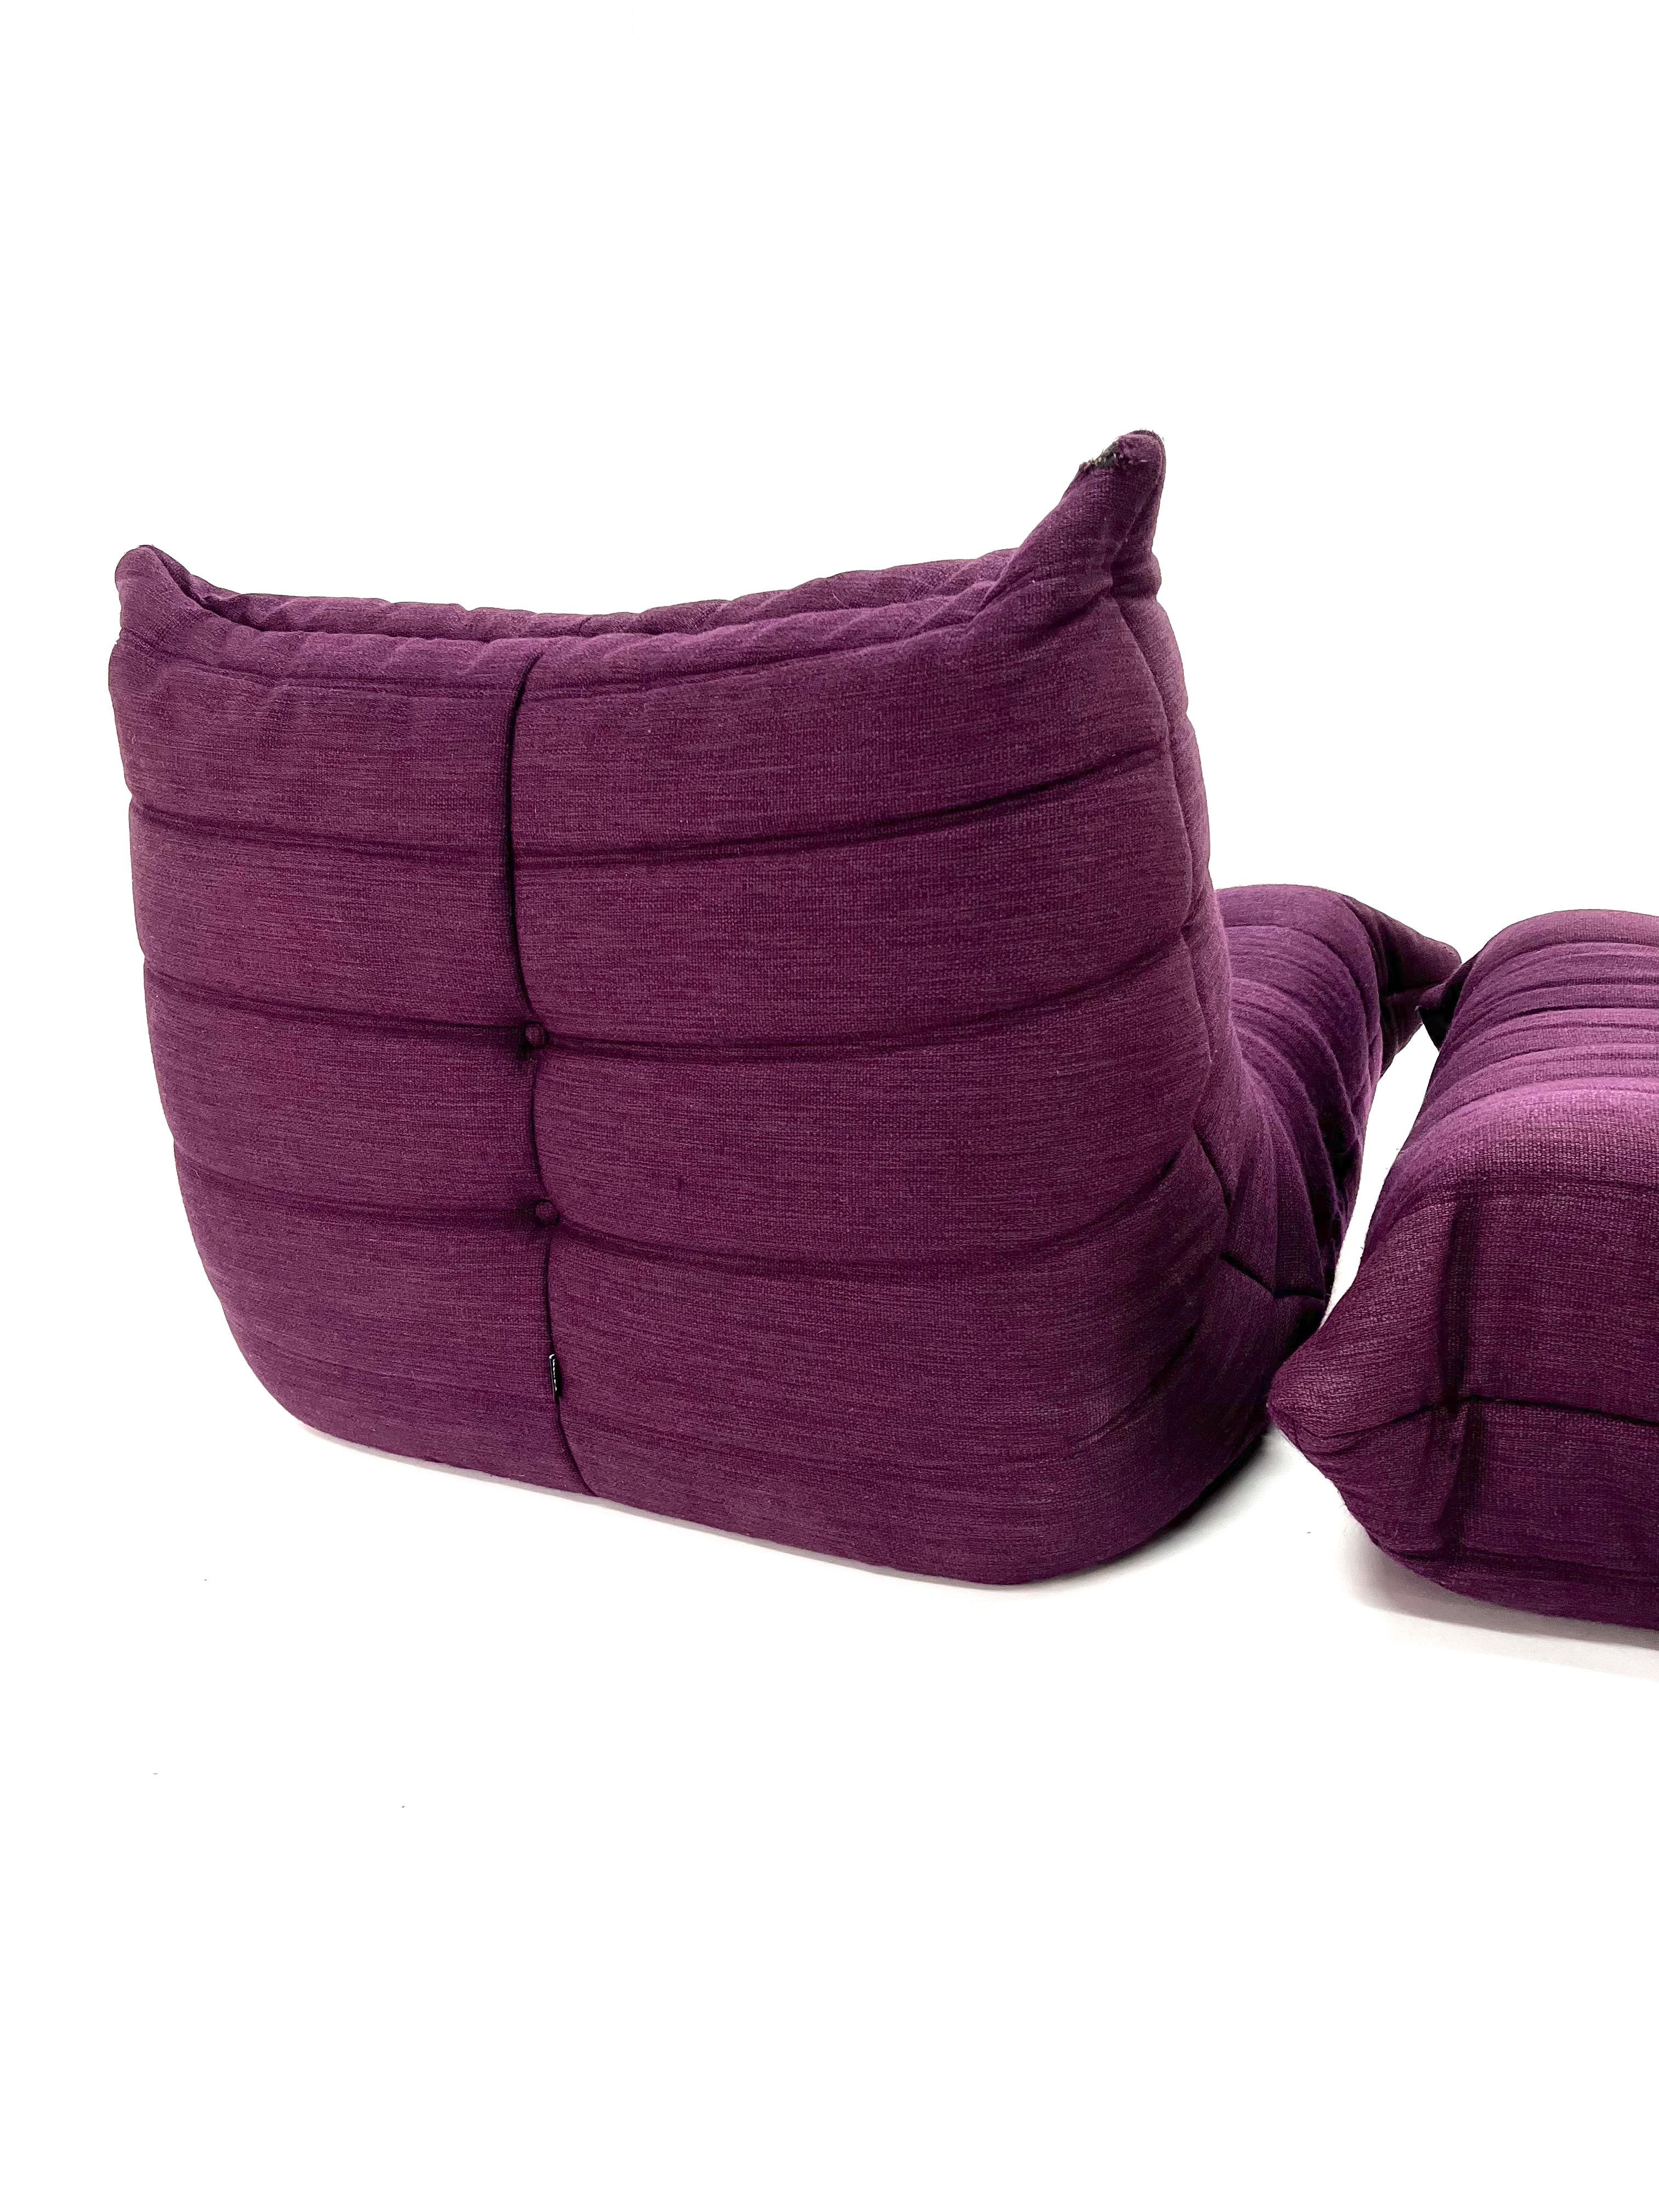 Togo Chair and Ottoman in Purple by Michel Ducaroy for Ligne Roset For Sale 11